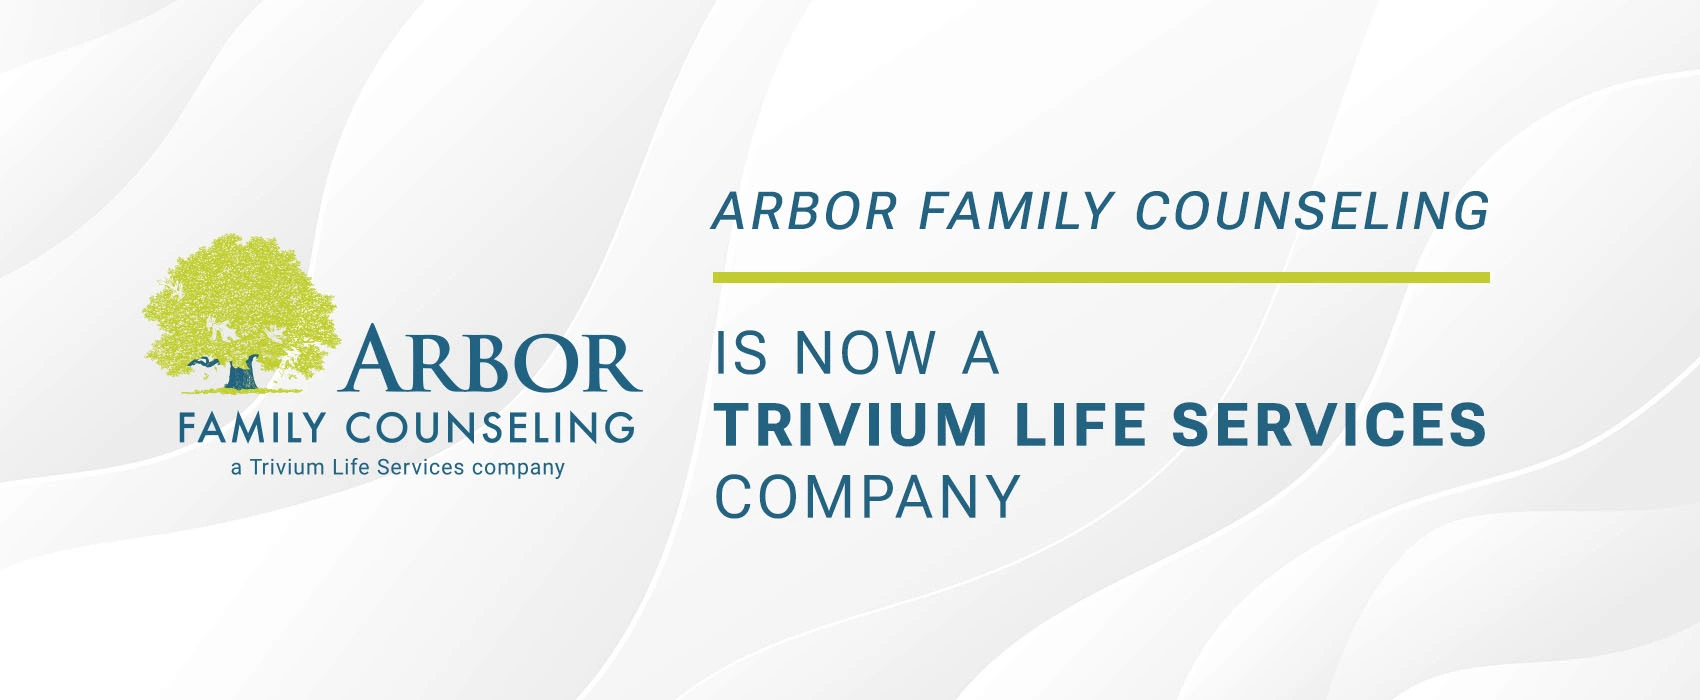 Arbor Family Counseling joins Trivium Life Service